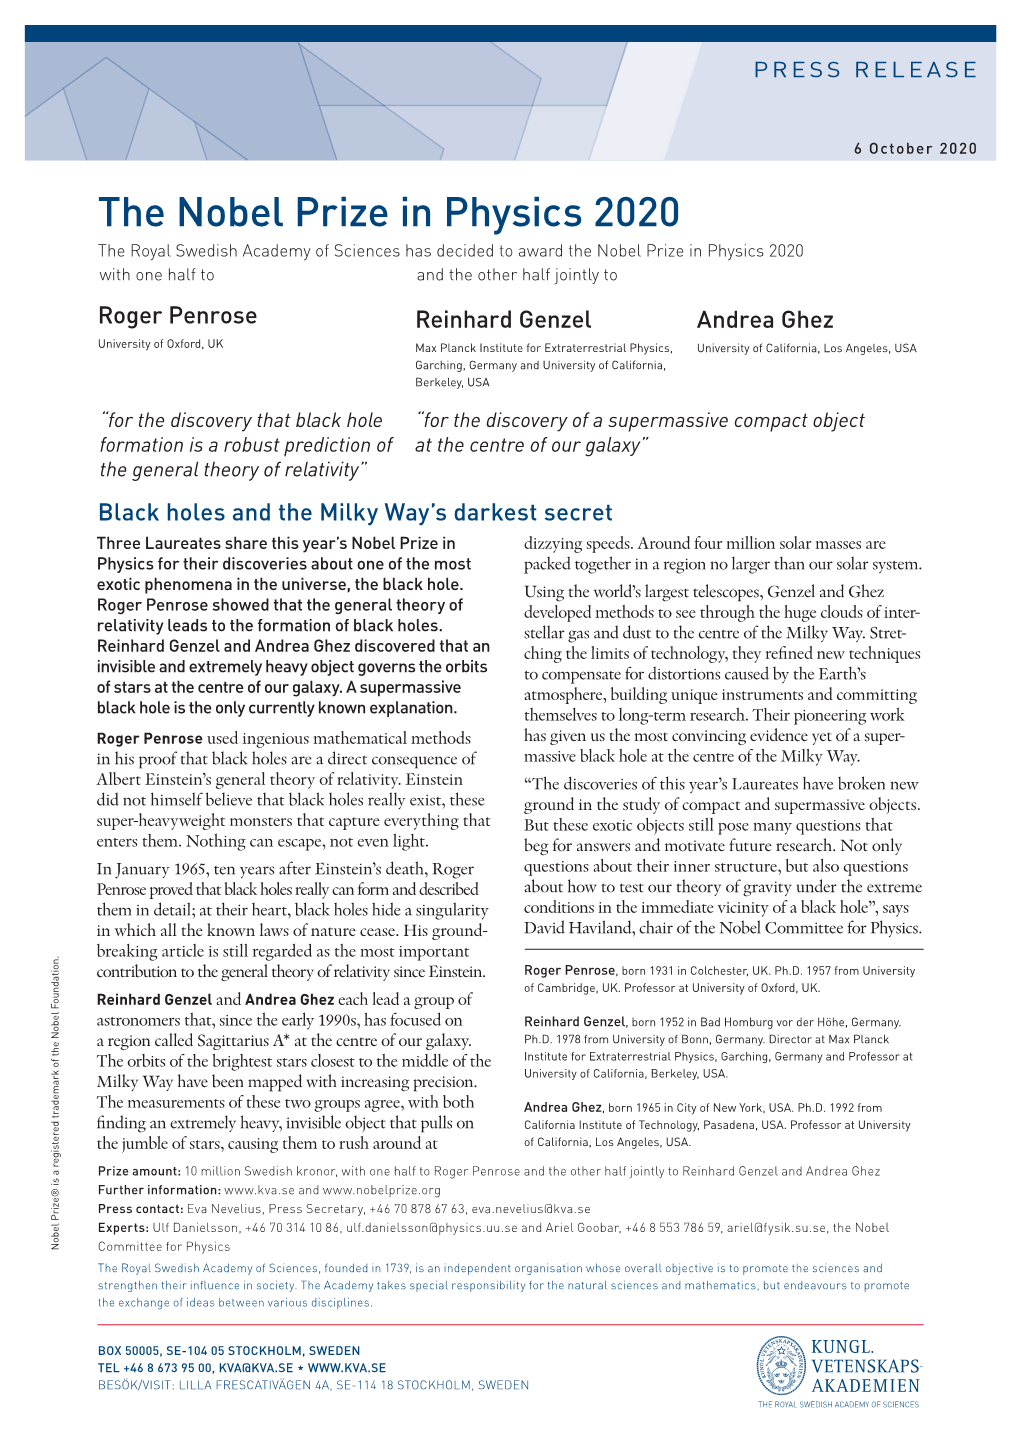 The Nobel Prize in Physics 2020